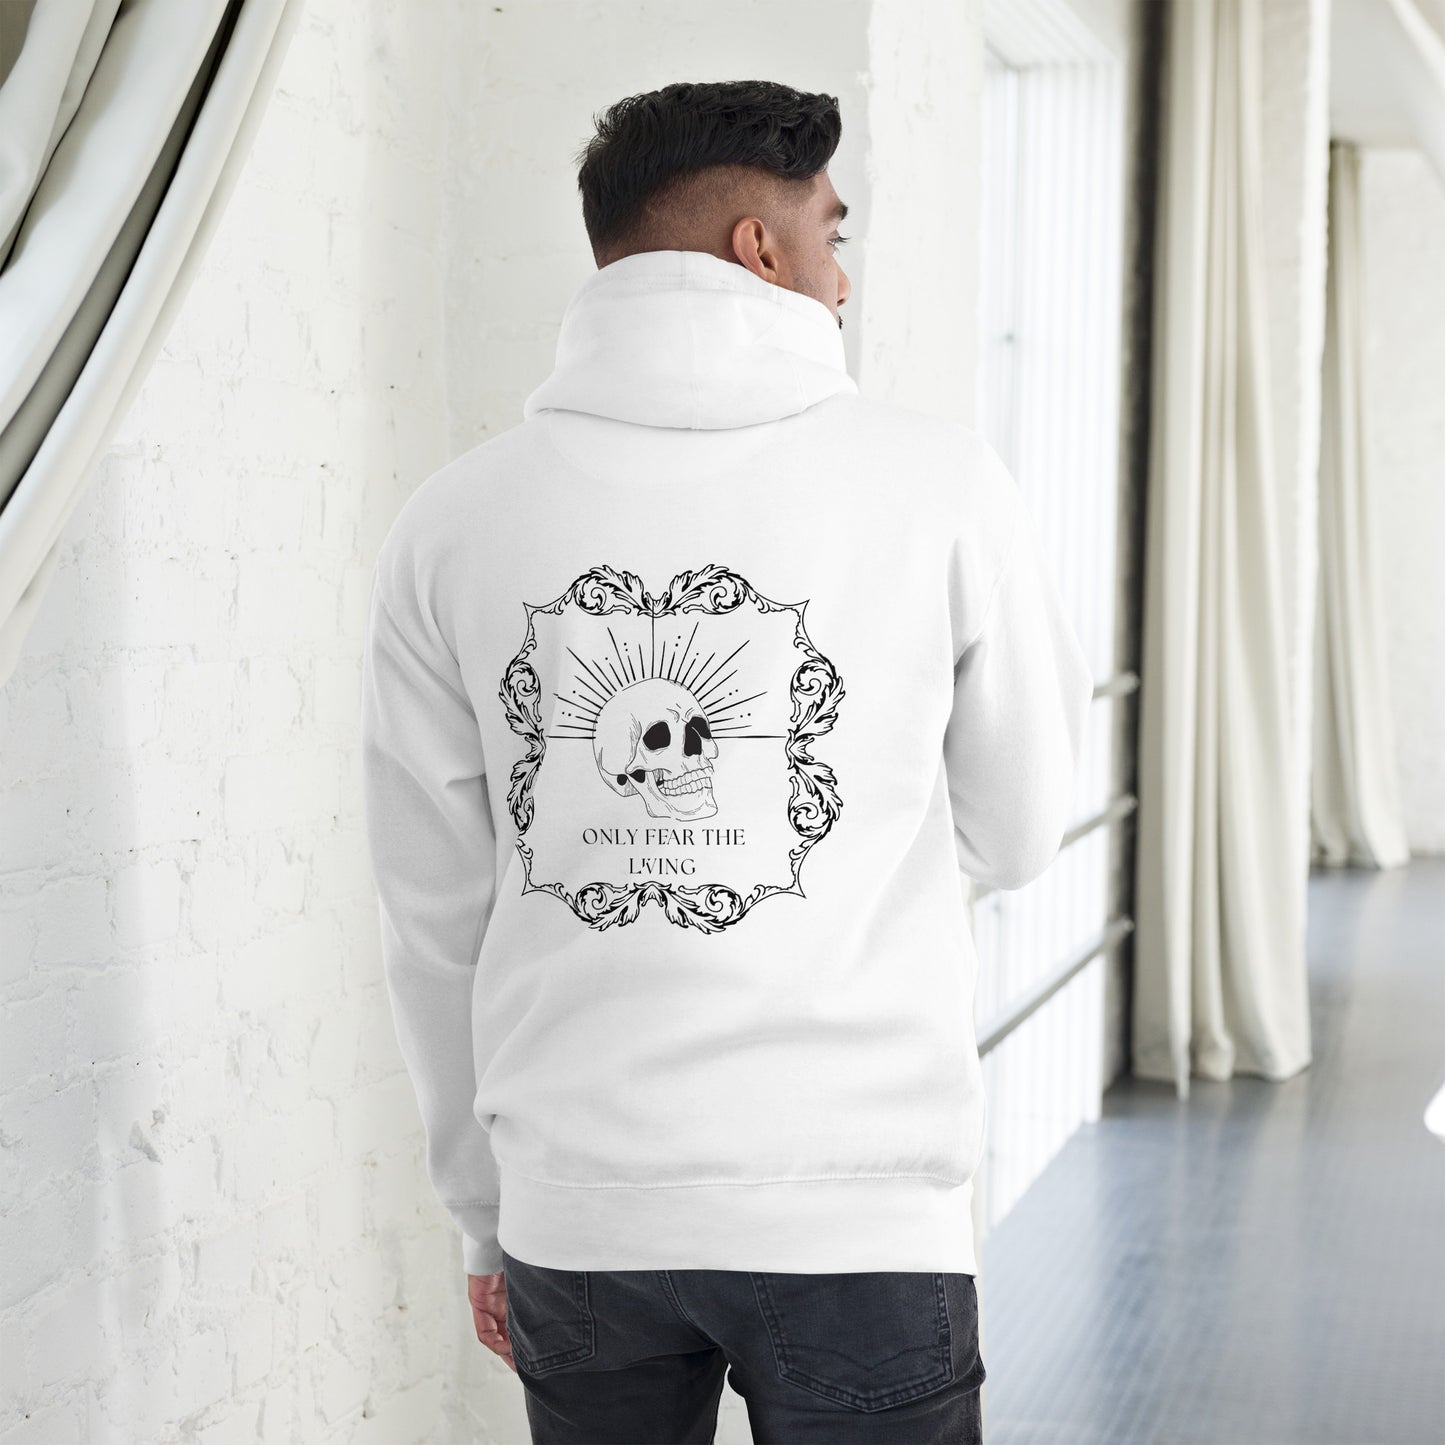 Only fear the living (skull) Unisex Hoodie